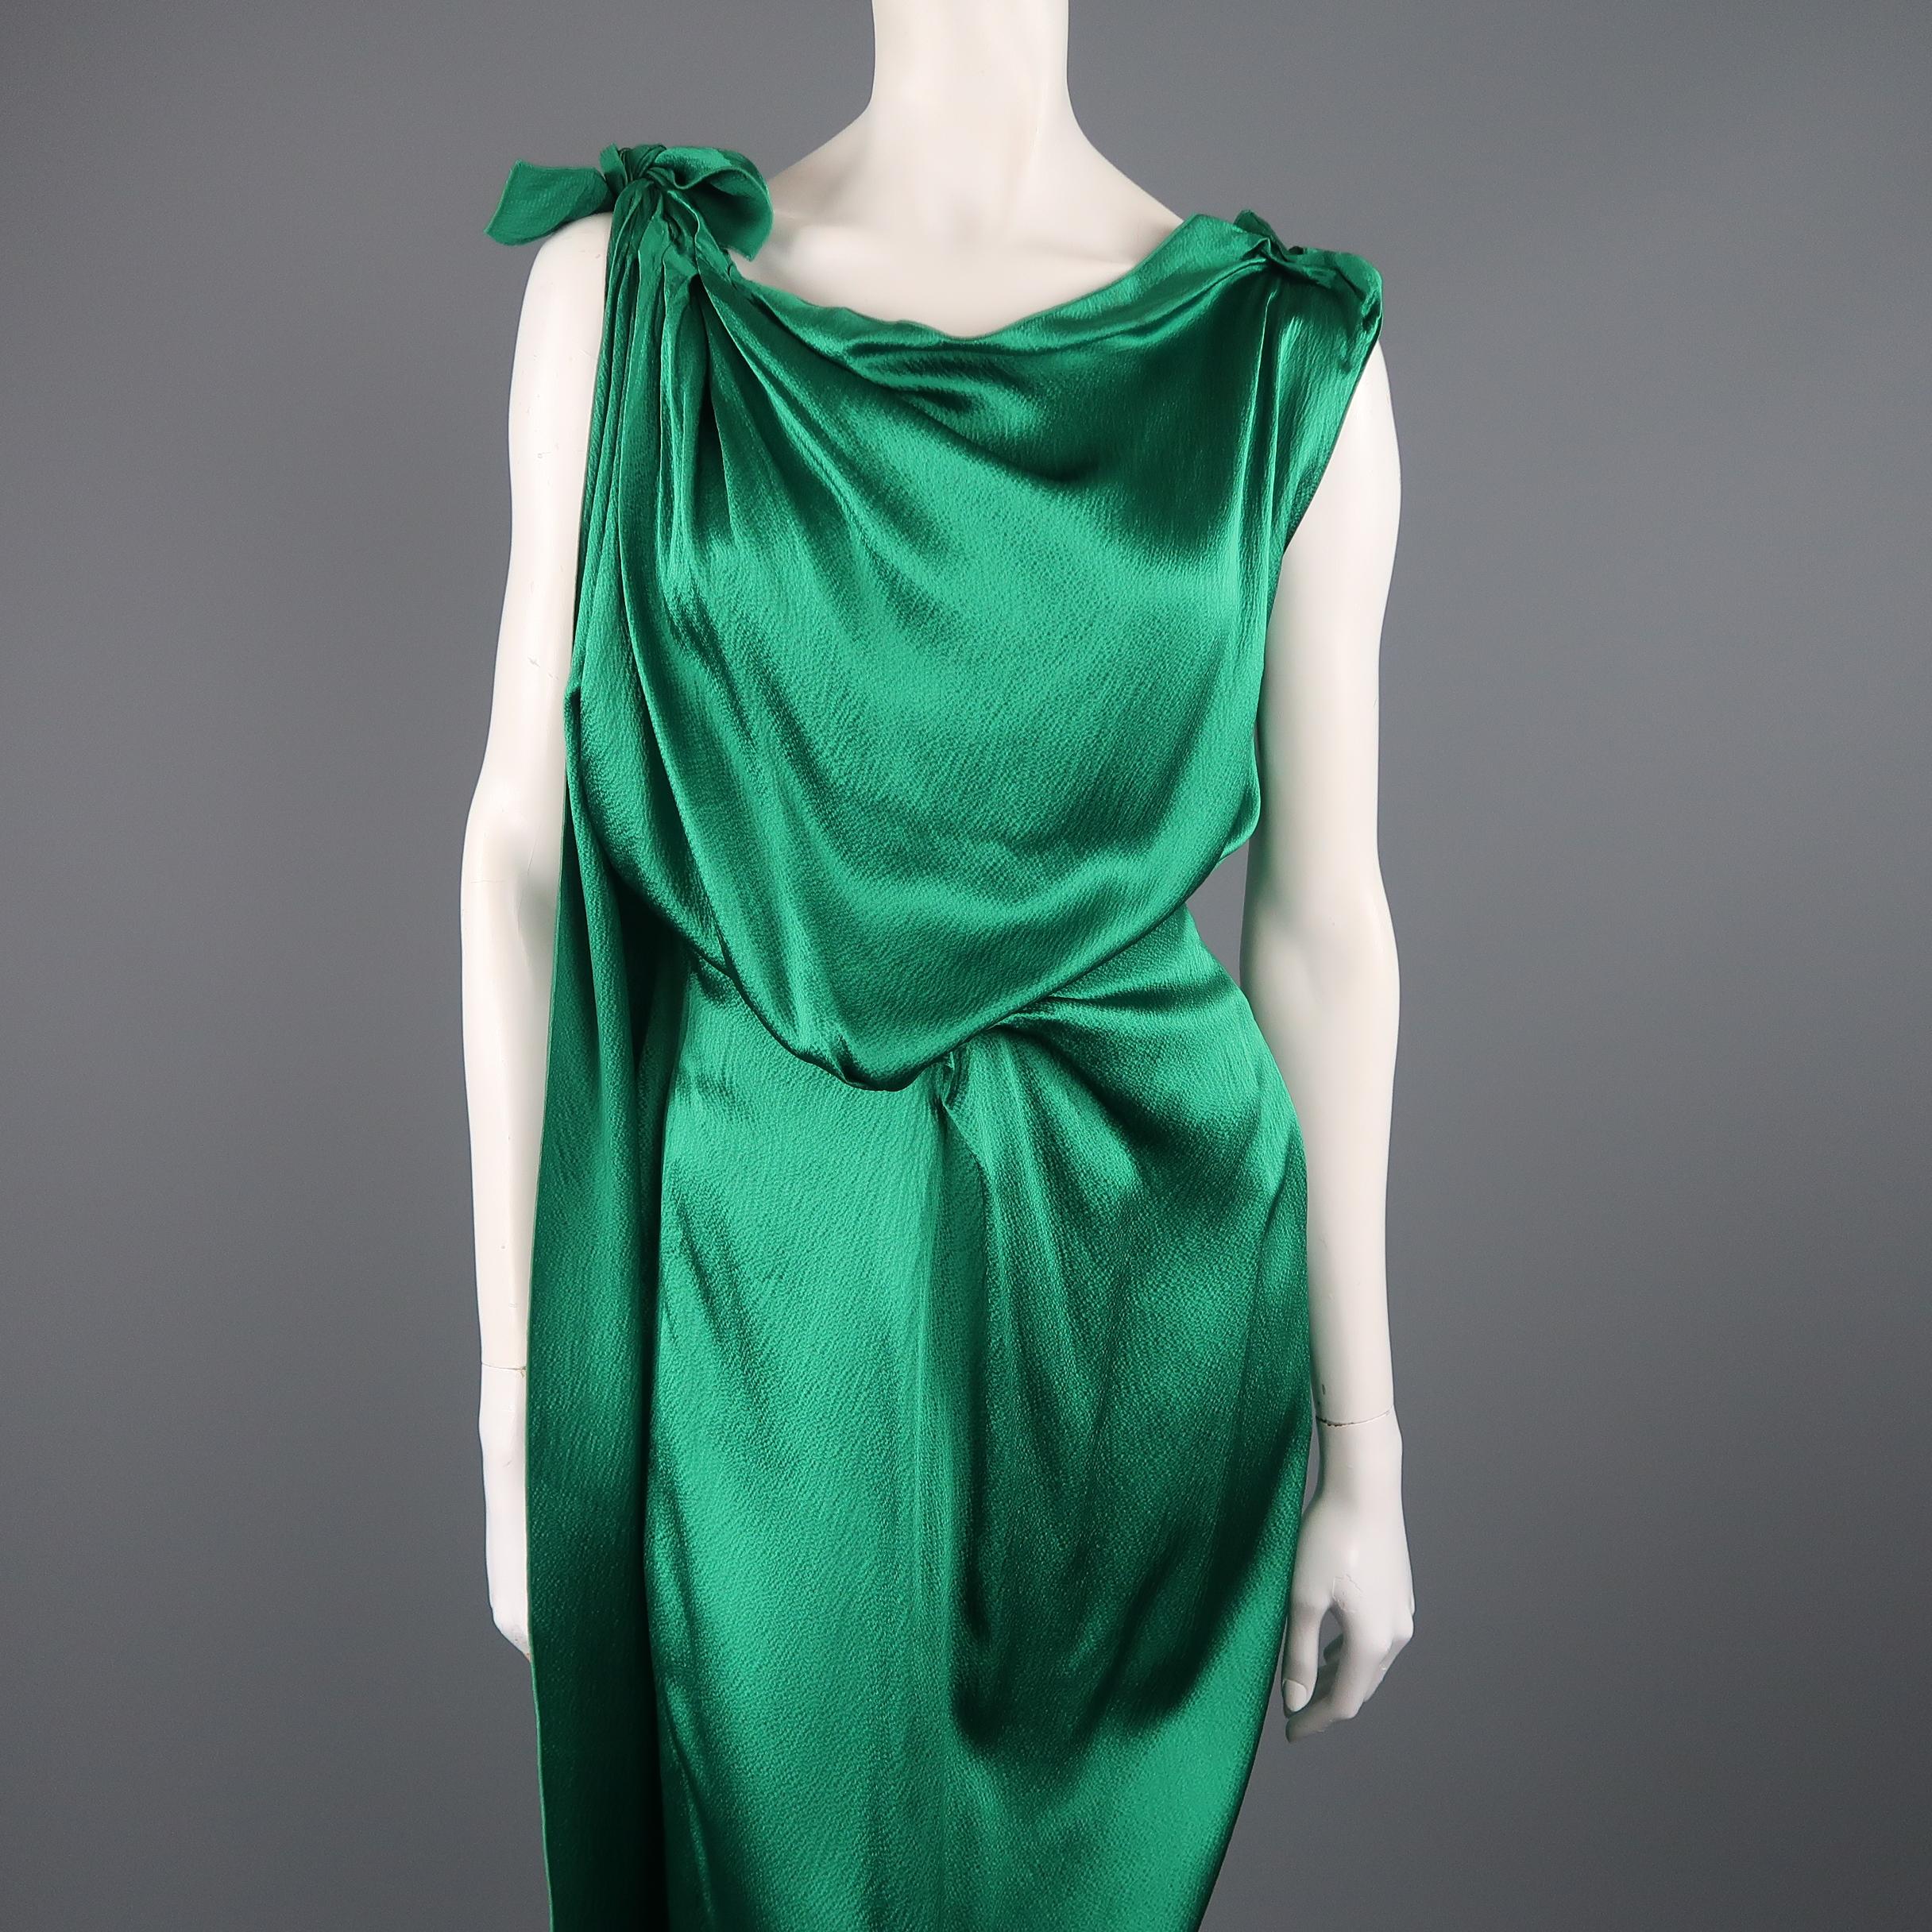 ROLAND MOURET column gown comes in emerald green hammered silk satin with a pleated, tied strap, asymmetrical pleat draped waist, and open side with zip closure.
 
New with Tags.
Marked: 6
 
Measurements:
 
Shoulder: 14 in.
Bust: 40 in.
Waist: 24